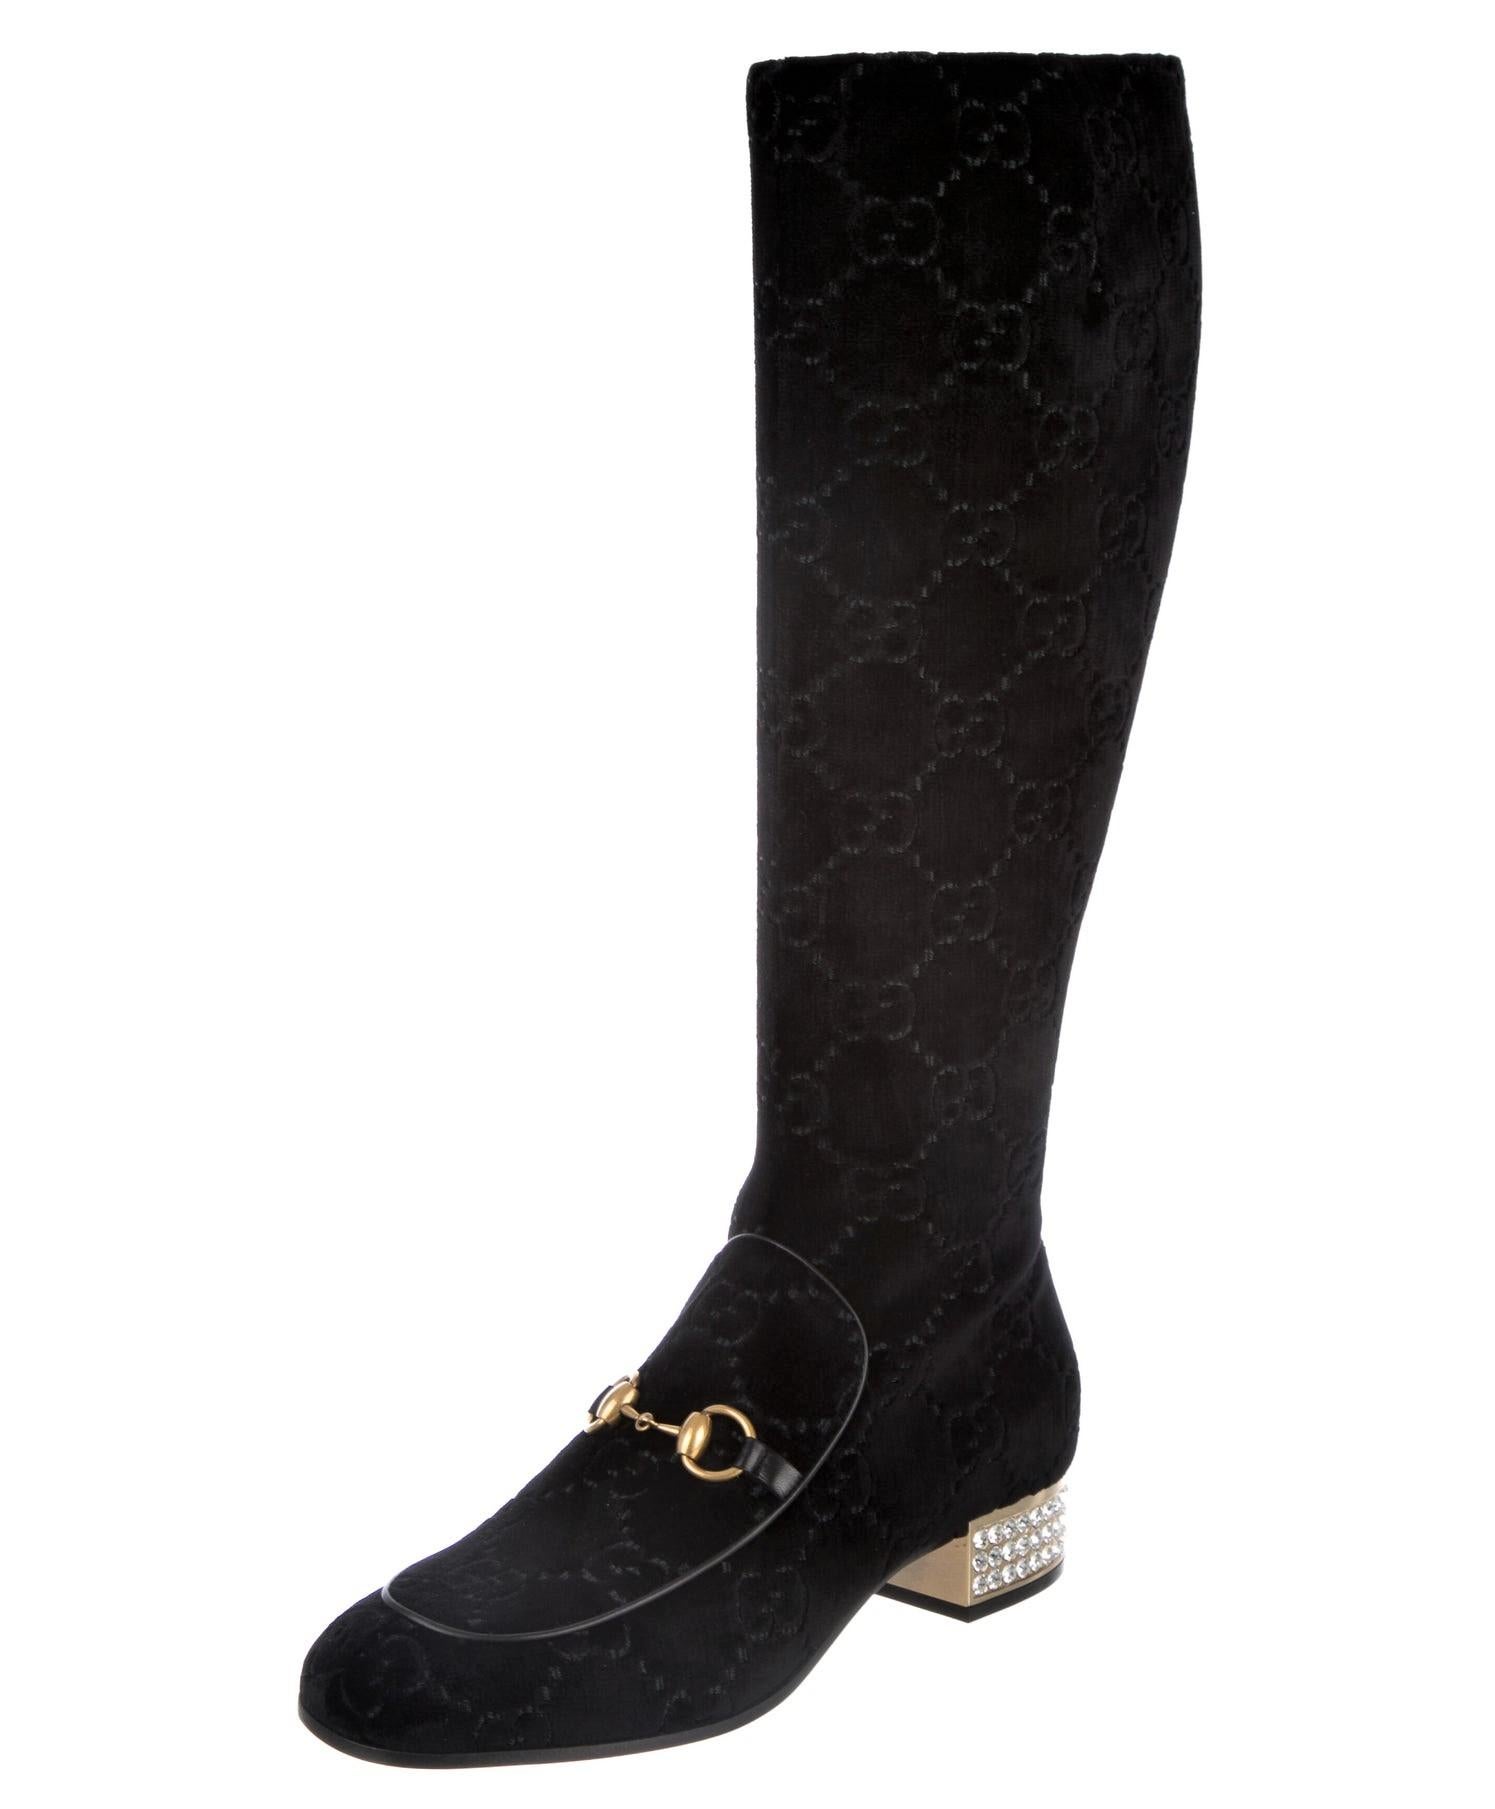 women's gucci boots